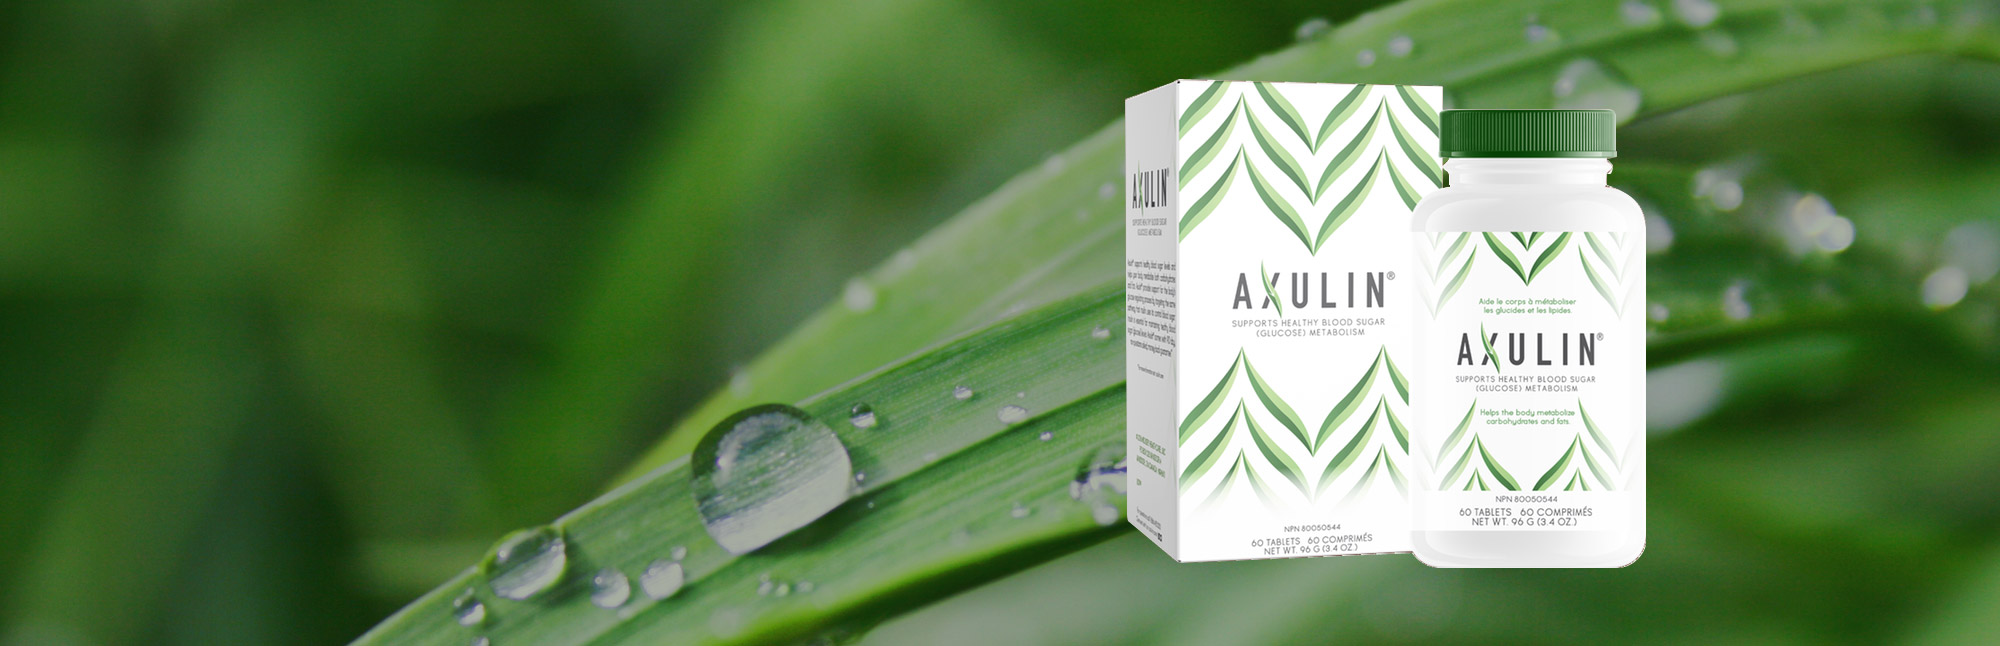 Axulin box and bottle with close-up of green leaf as background